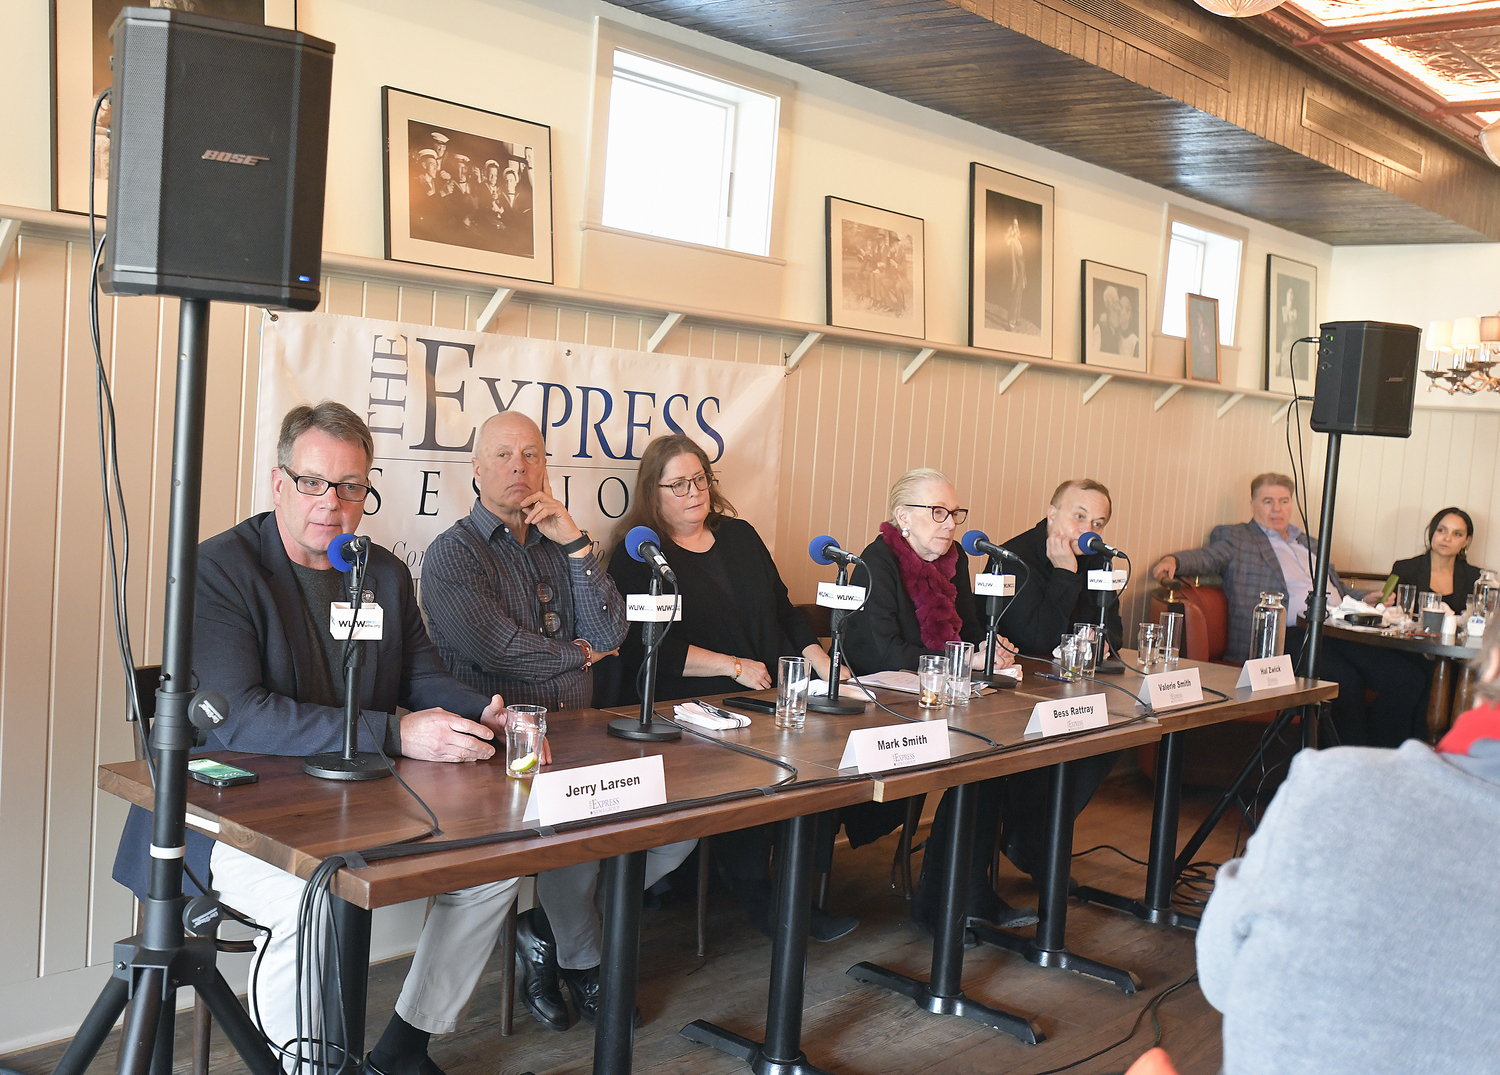 The panel at at Rowdy Hall in Amagansett for the February 1 Express Session,  